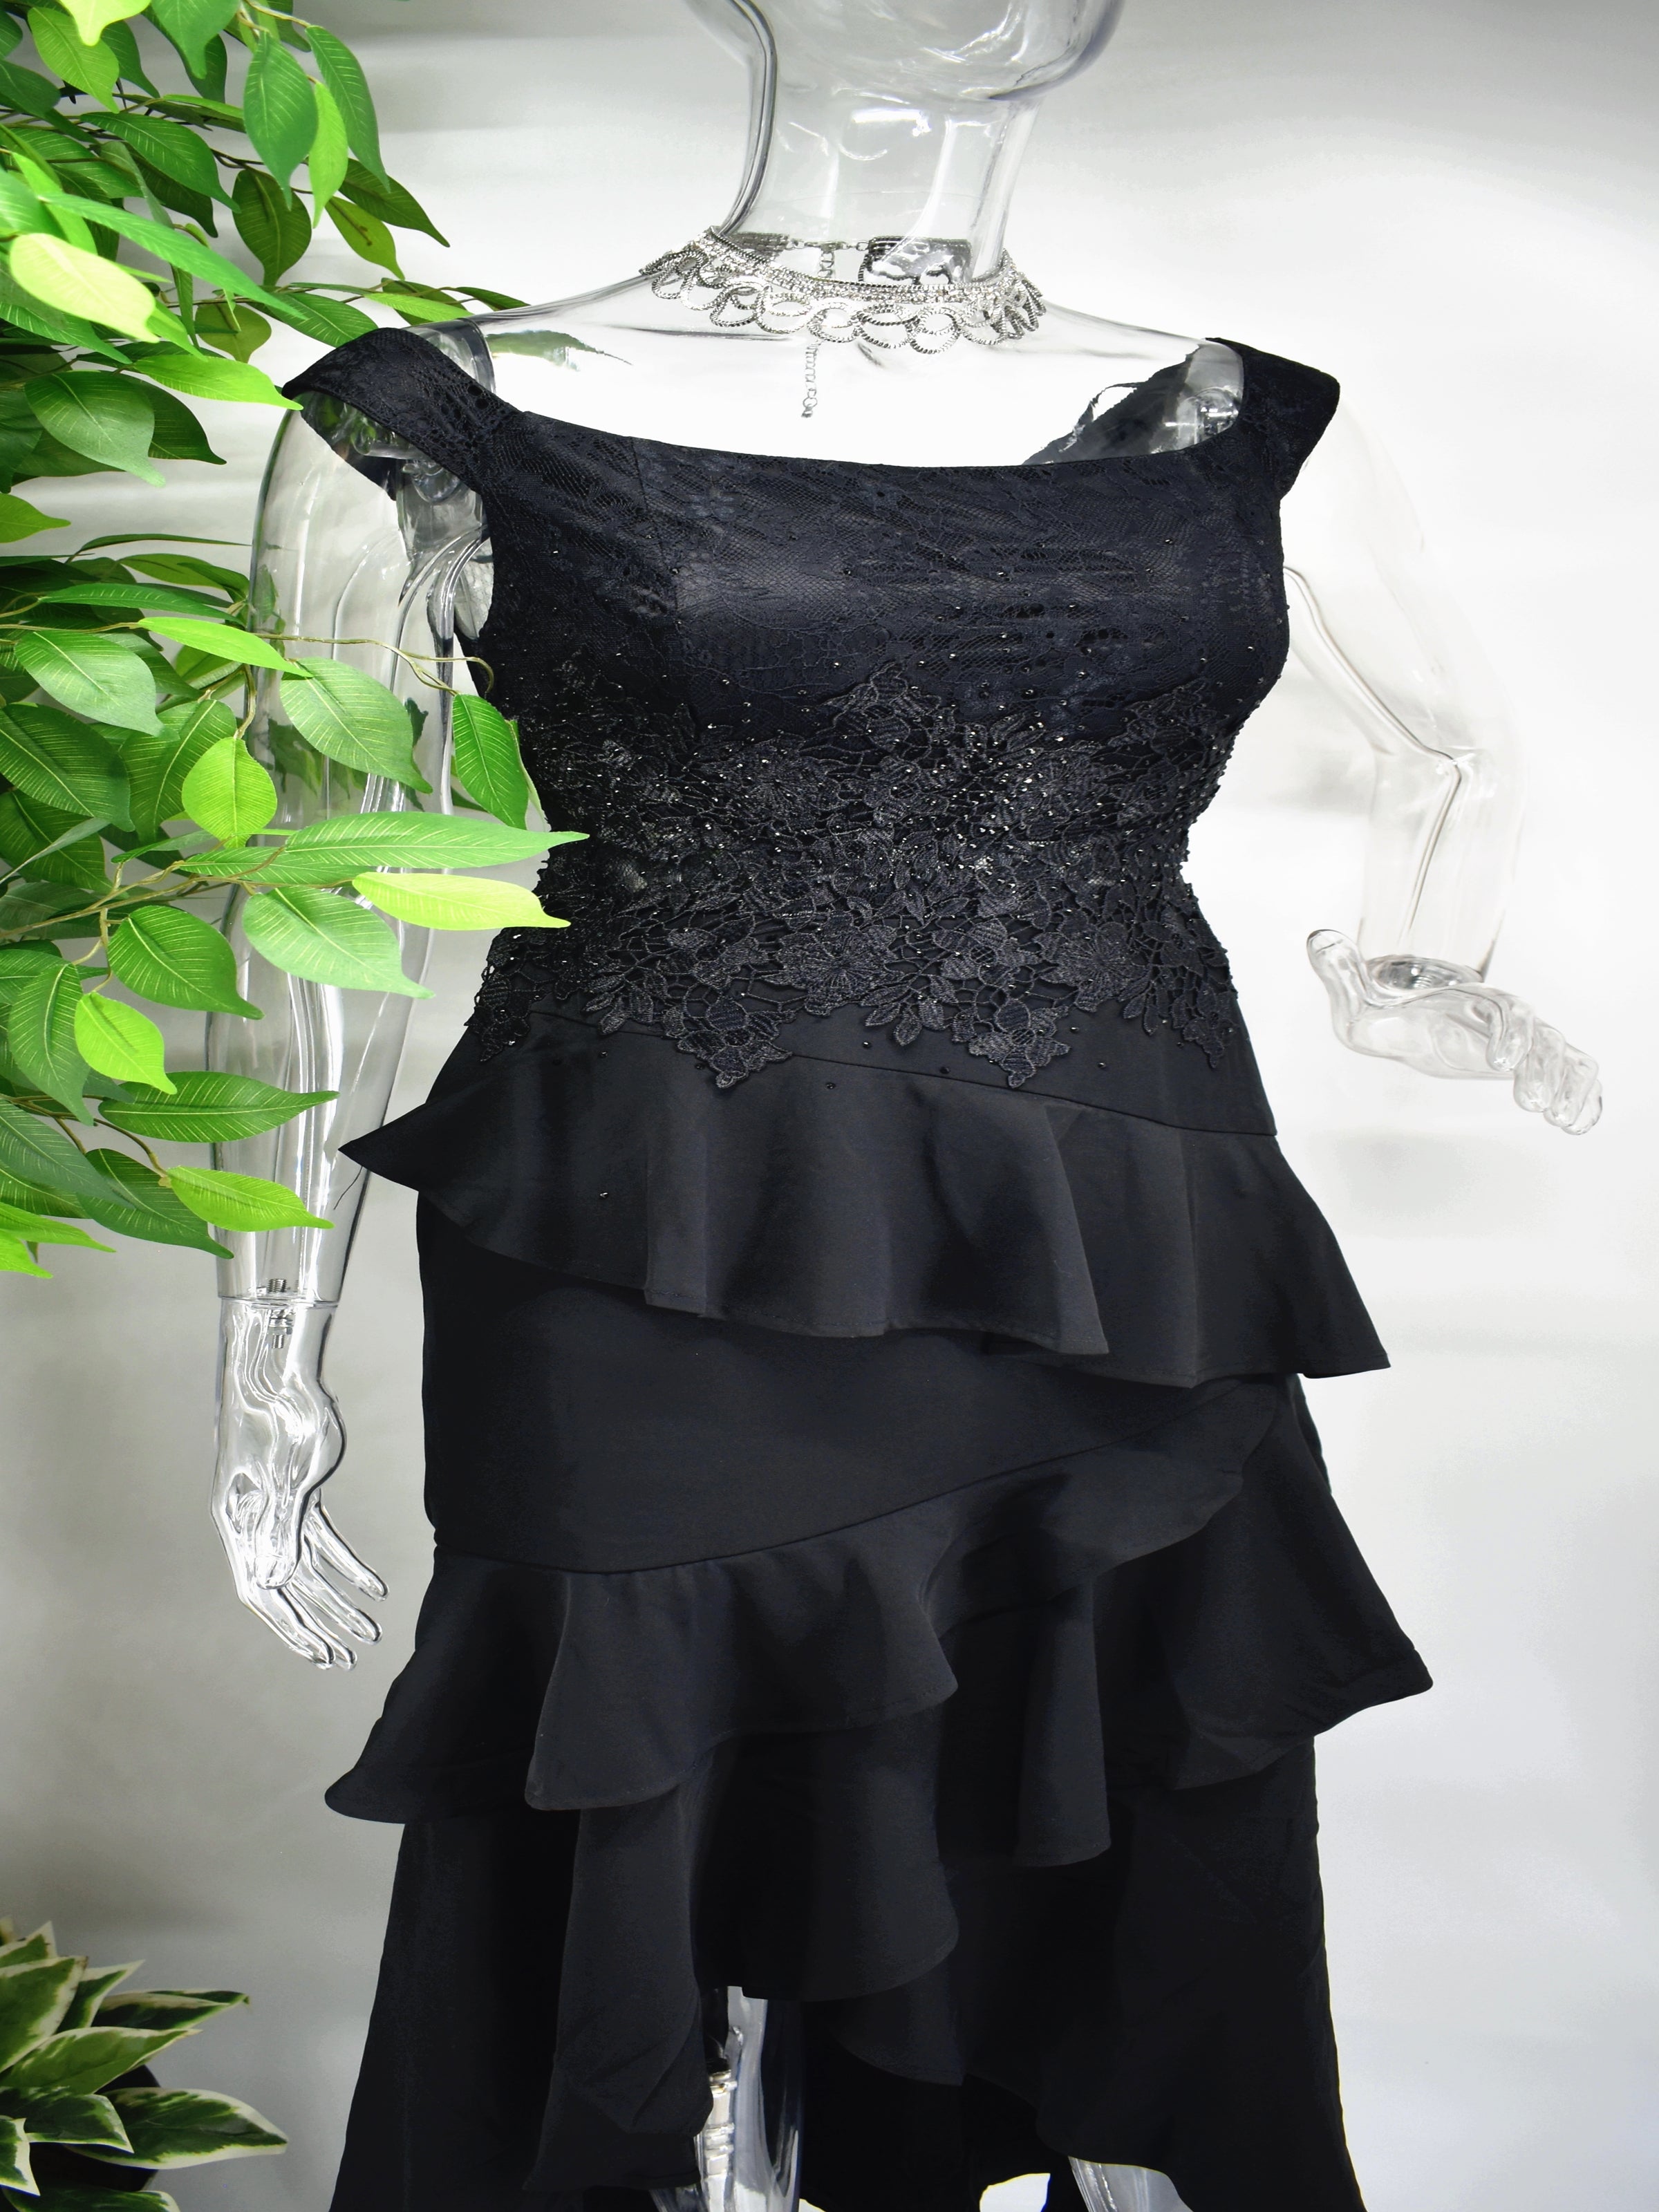 There is so much to love about our incredible Bedelia Black dress. The black formal dress has a boat neckline accompanied by a beaded bodice and frills cascading down to the hem of the dress.  